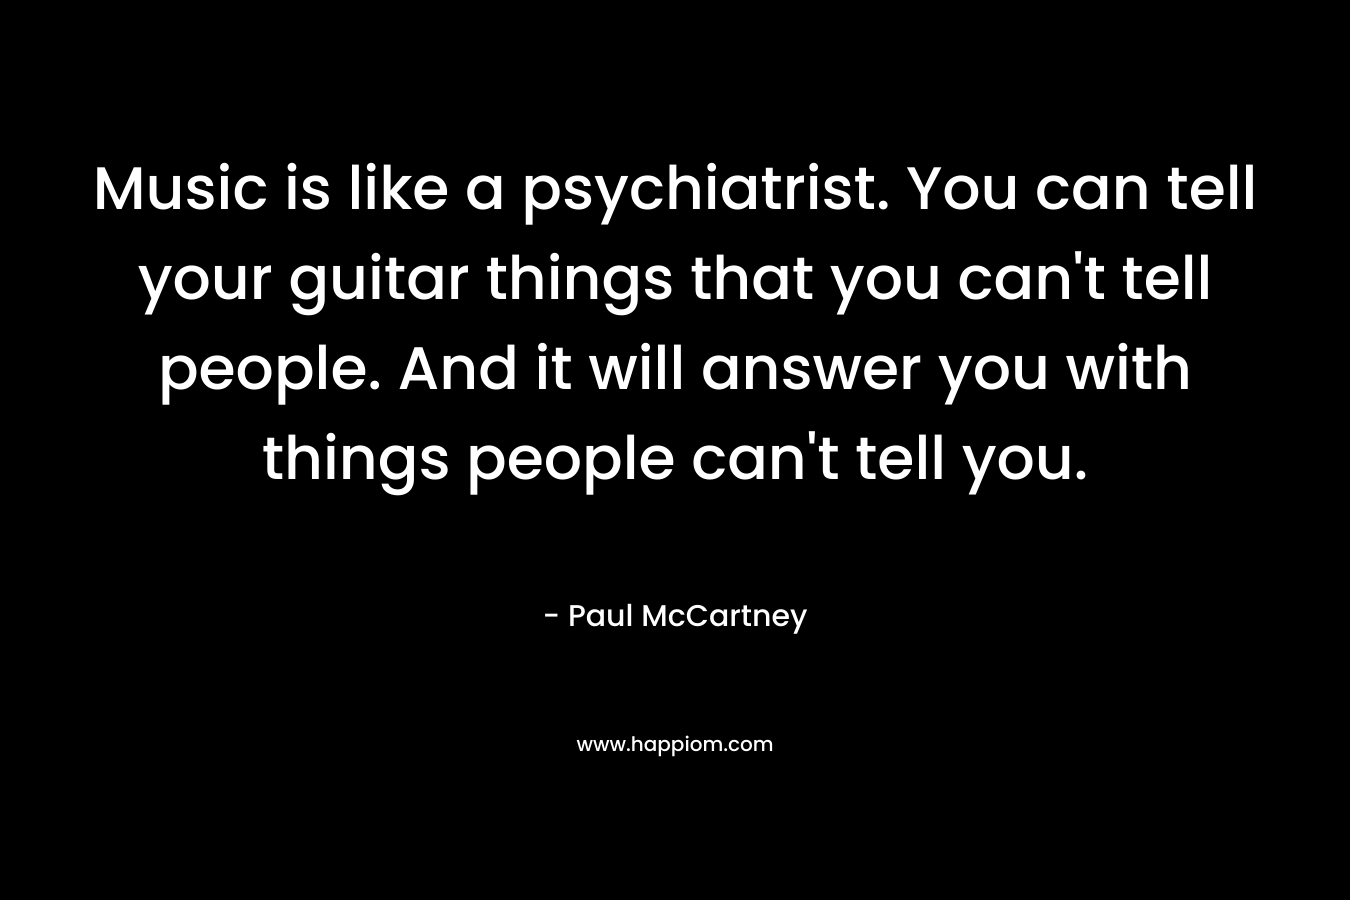 Music is like a psychiatrist. You can tell your guitar things that you can’t tell people. And it will answer you with things people can’t tell you. – Paul McCartney